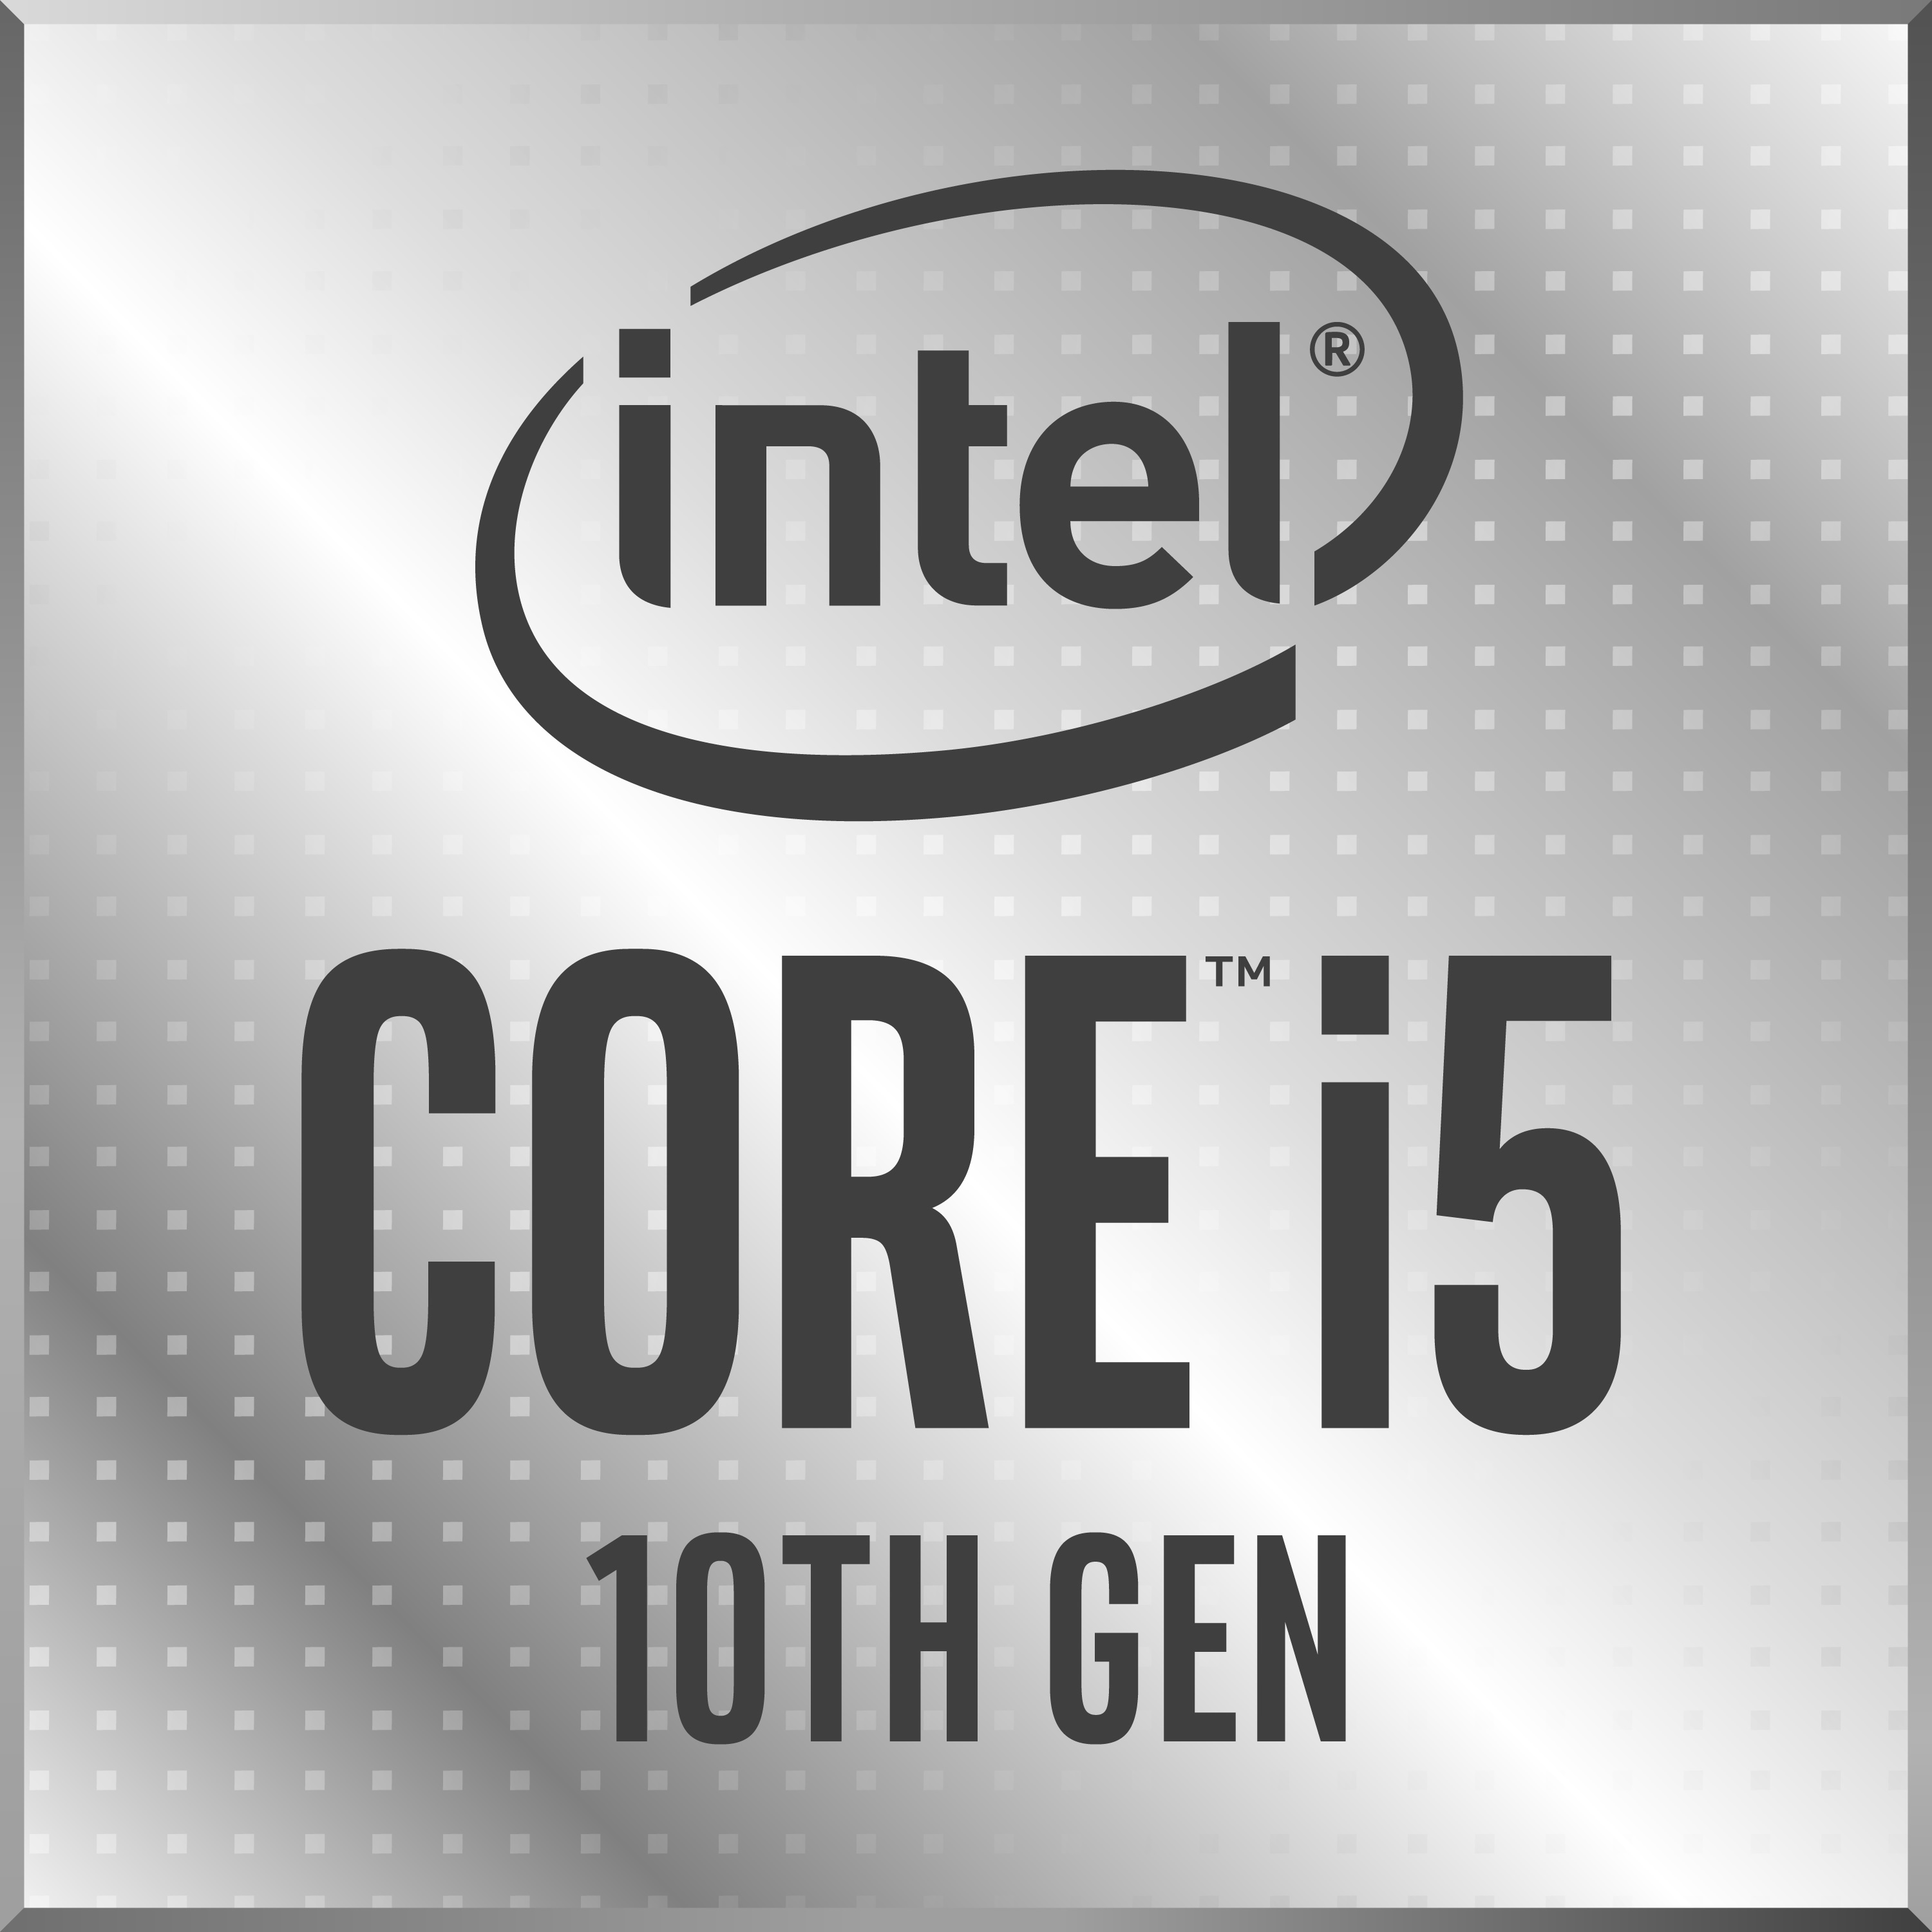 Intel Core i5-10300H SoC - Benchmarks and Specs -  Tech